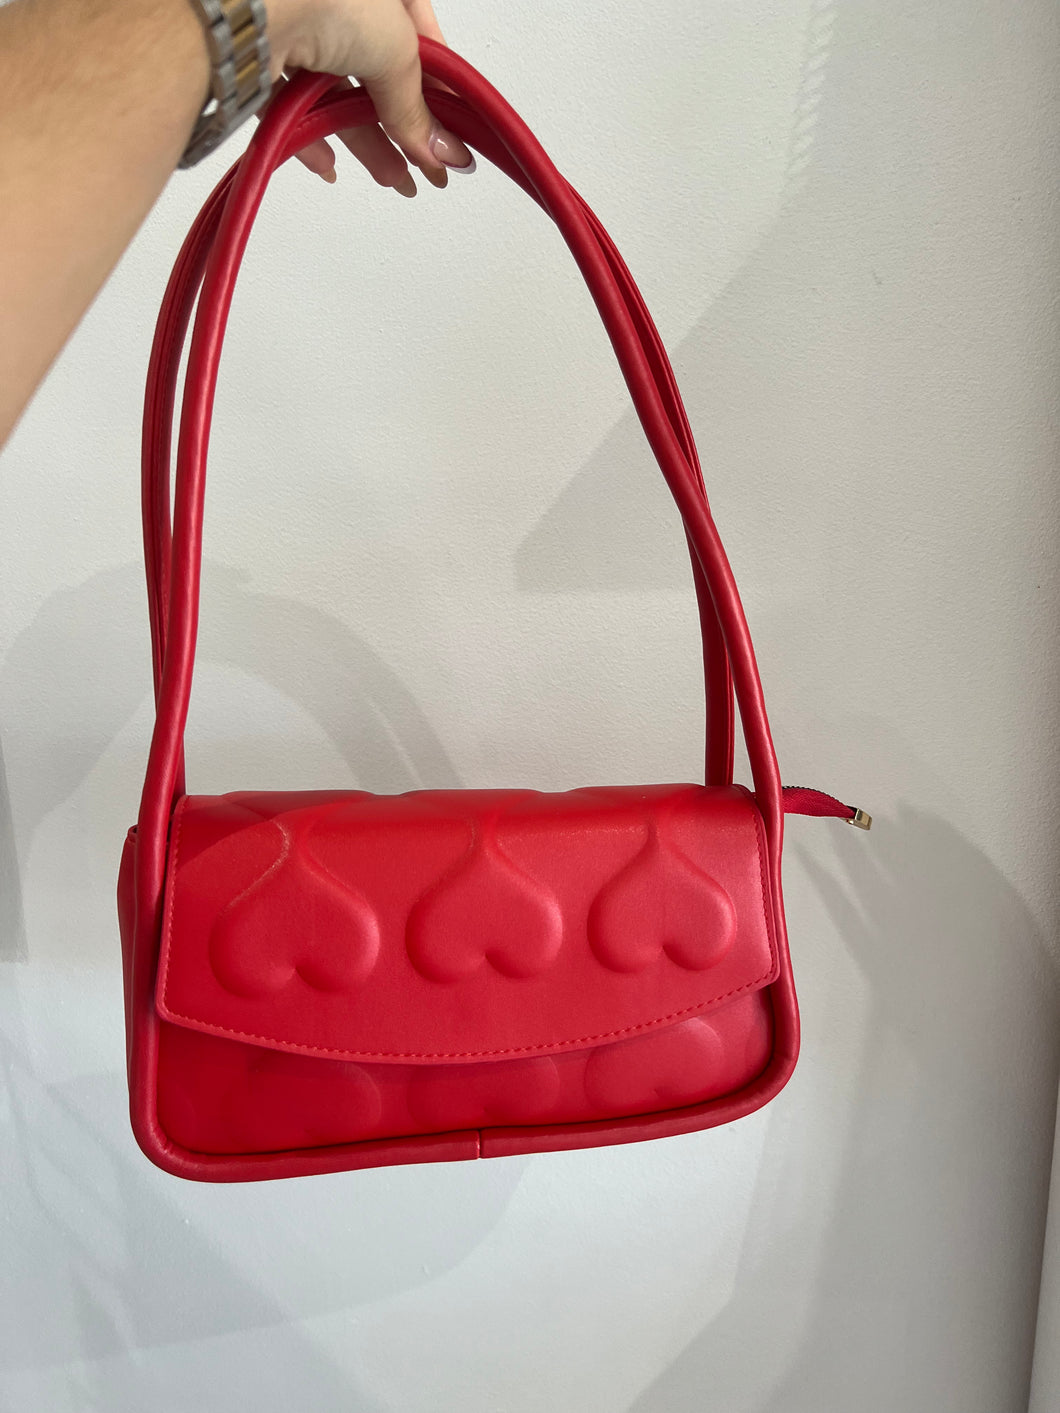 Red bag with handles